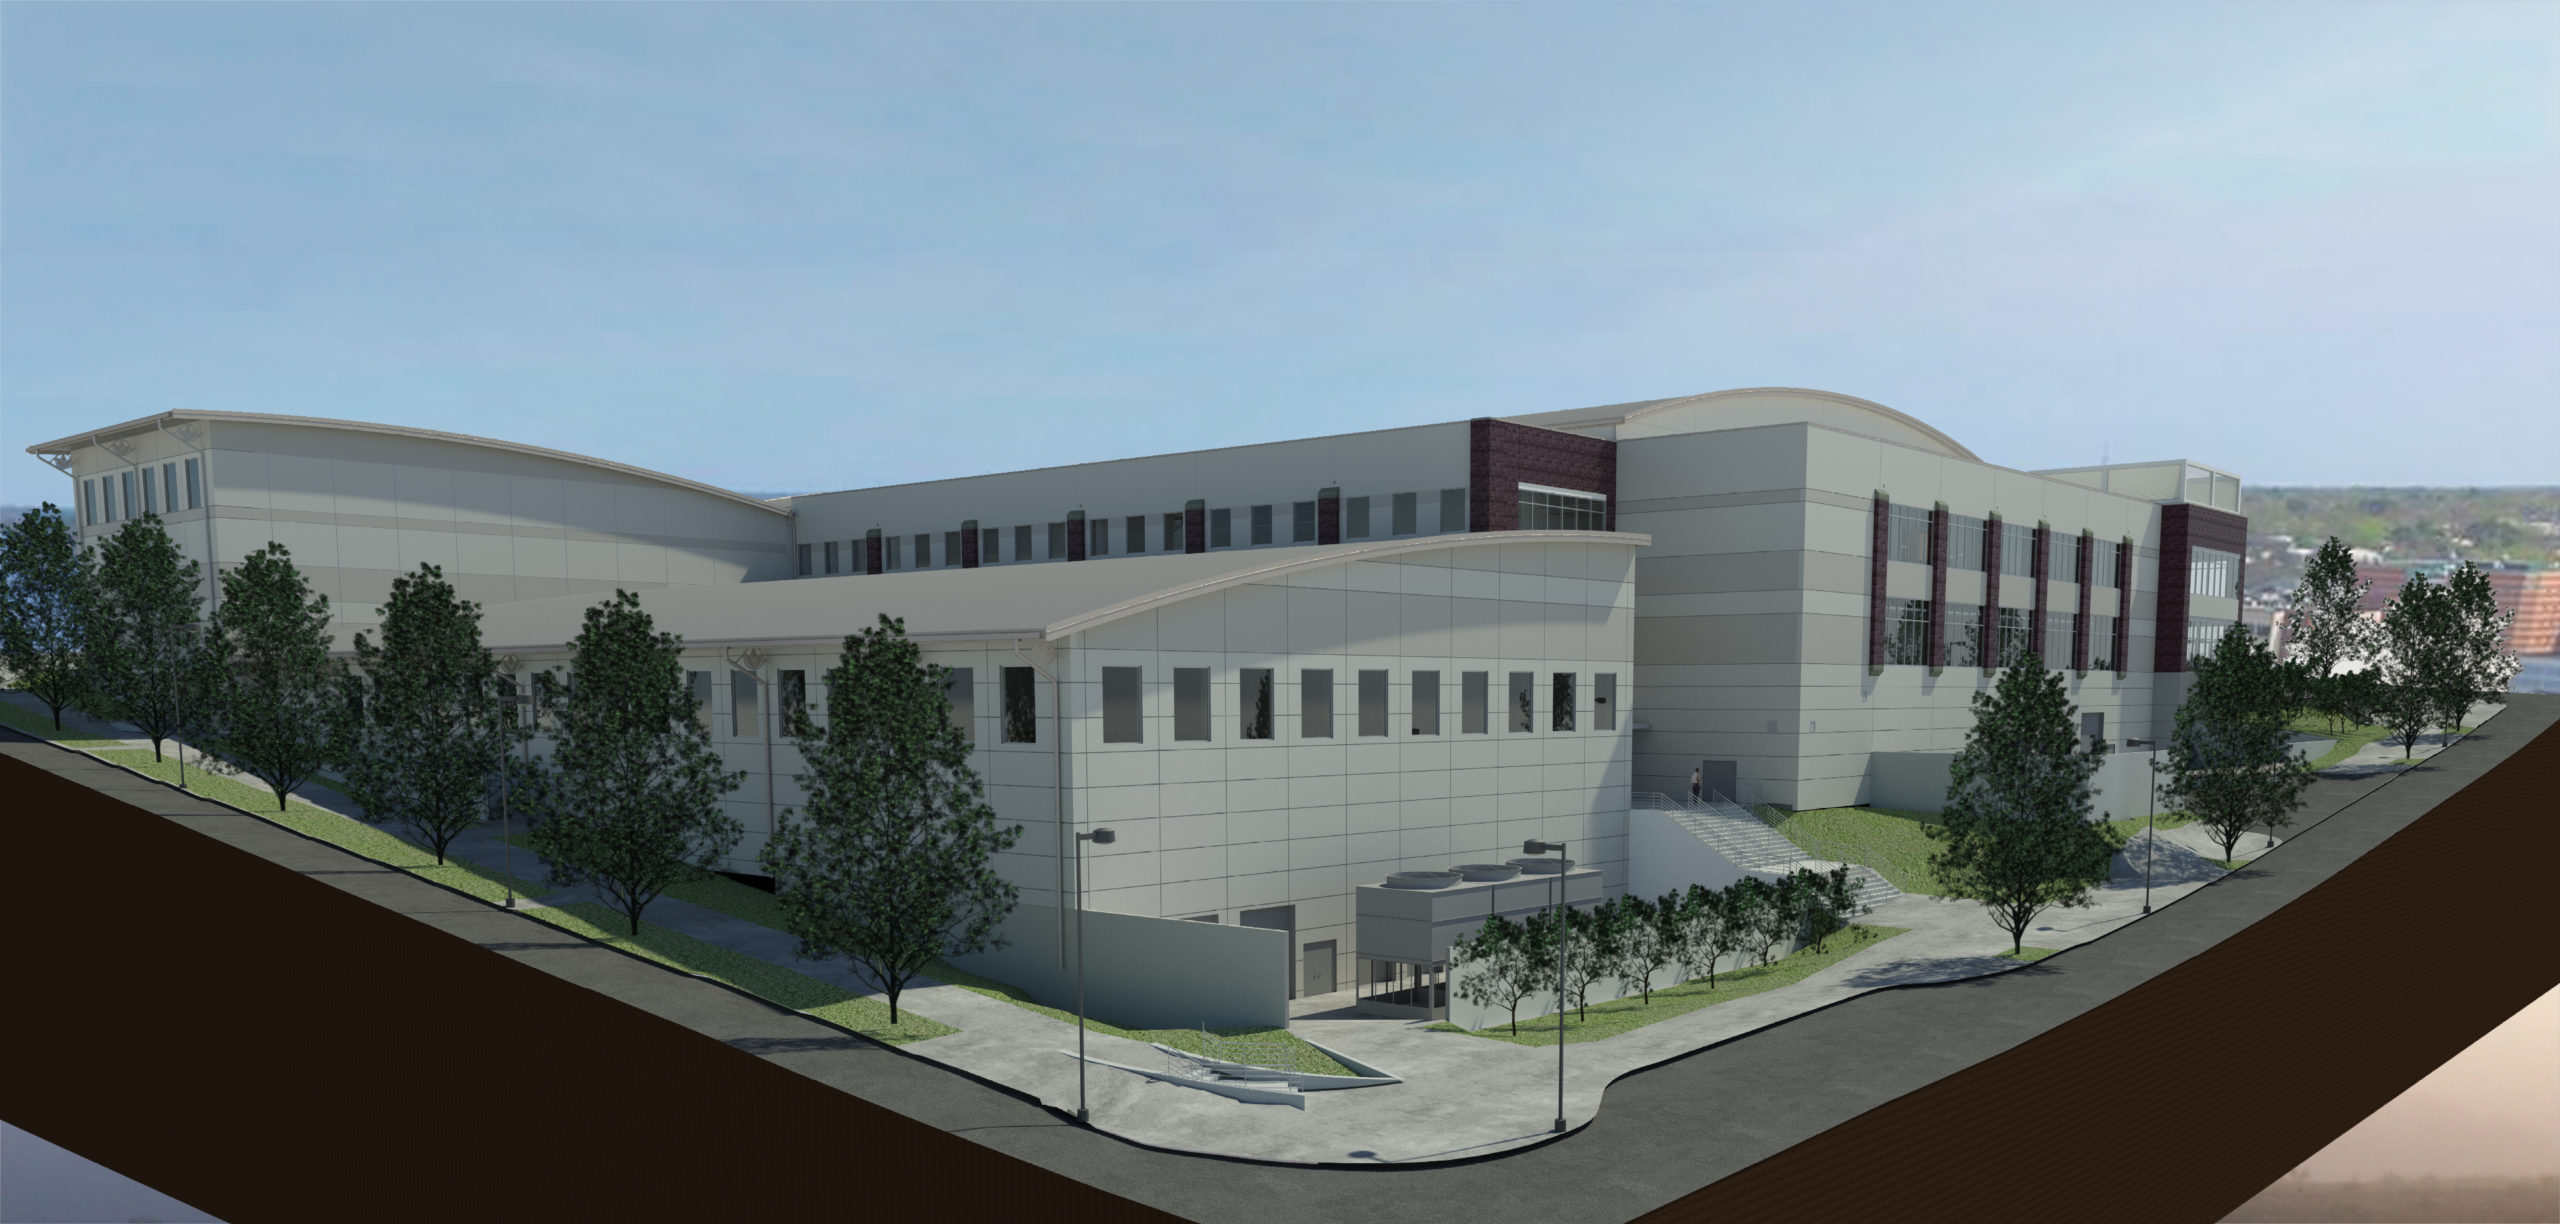 MPEC_Exterior-Render-NW-bkgnd-scaled.jpg